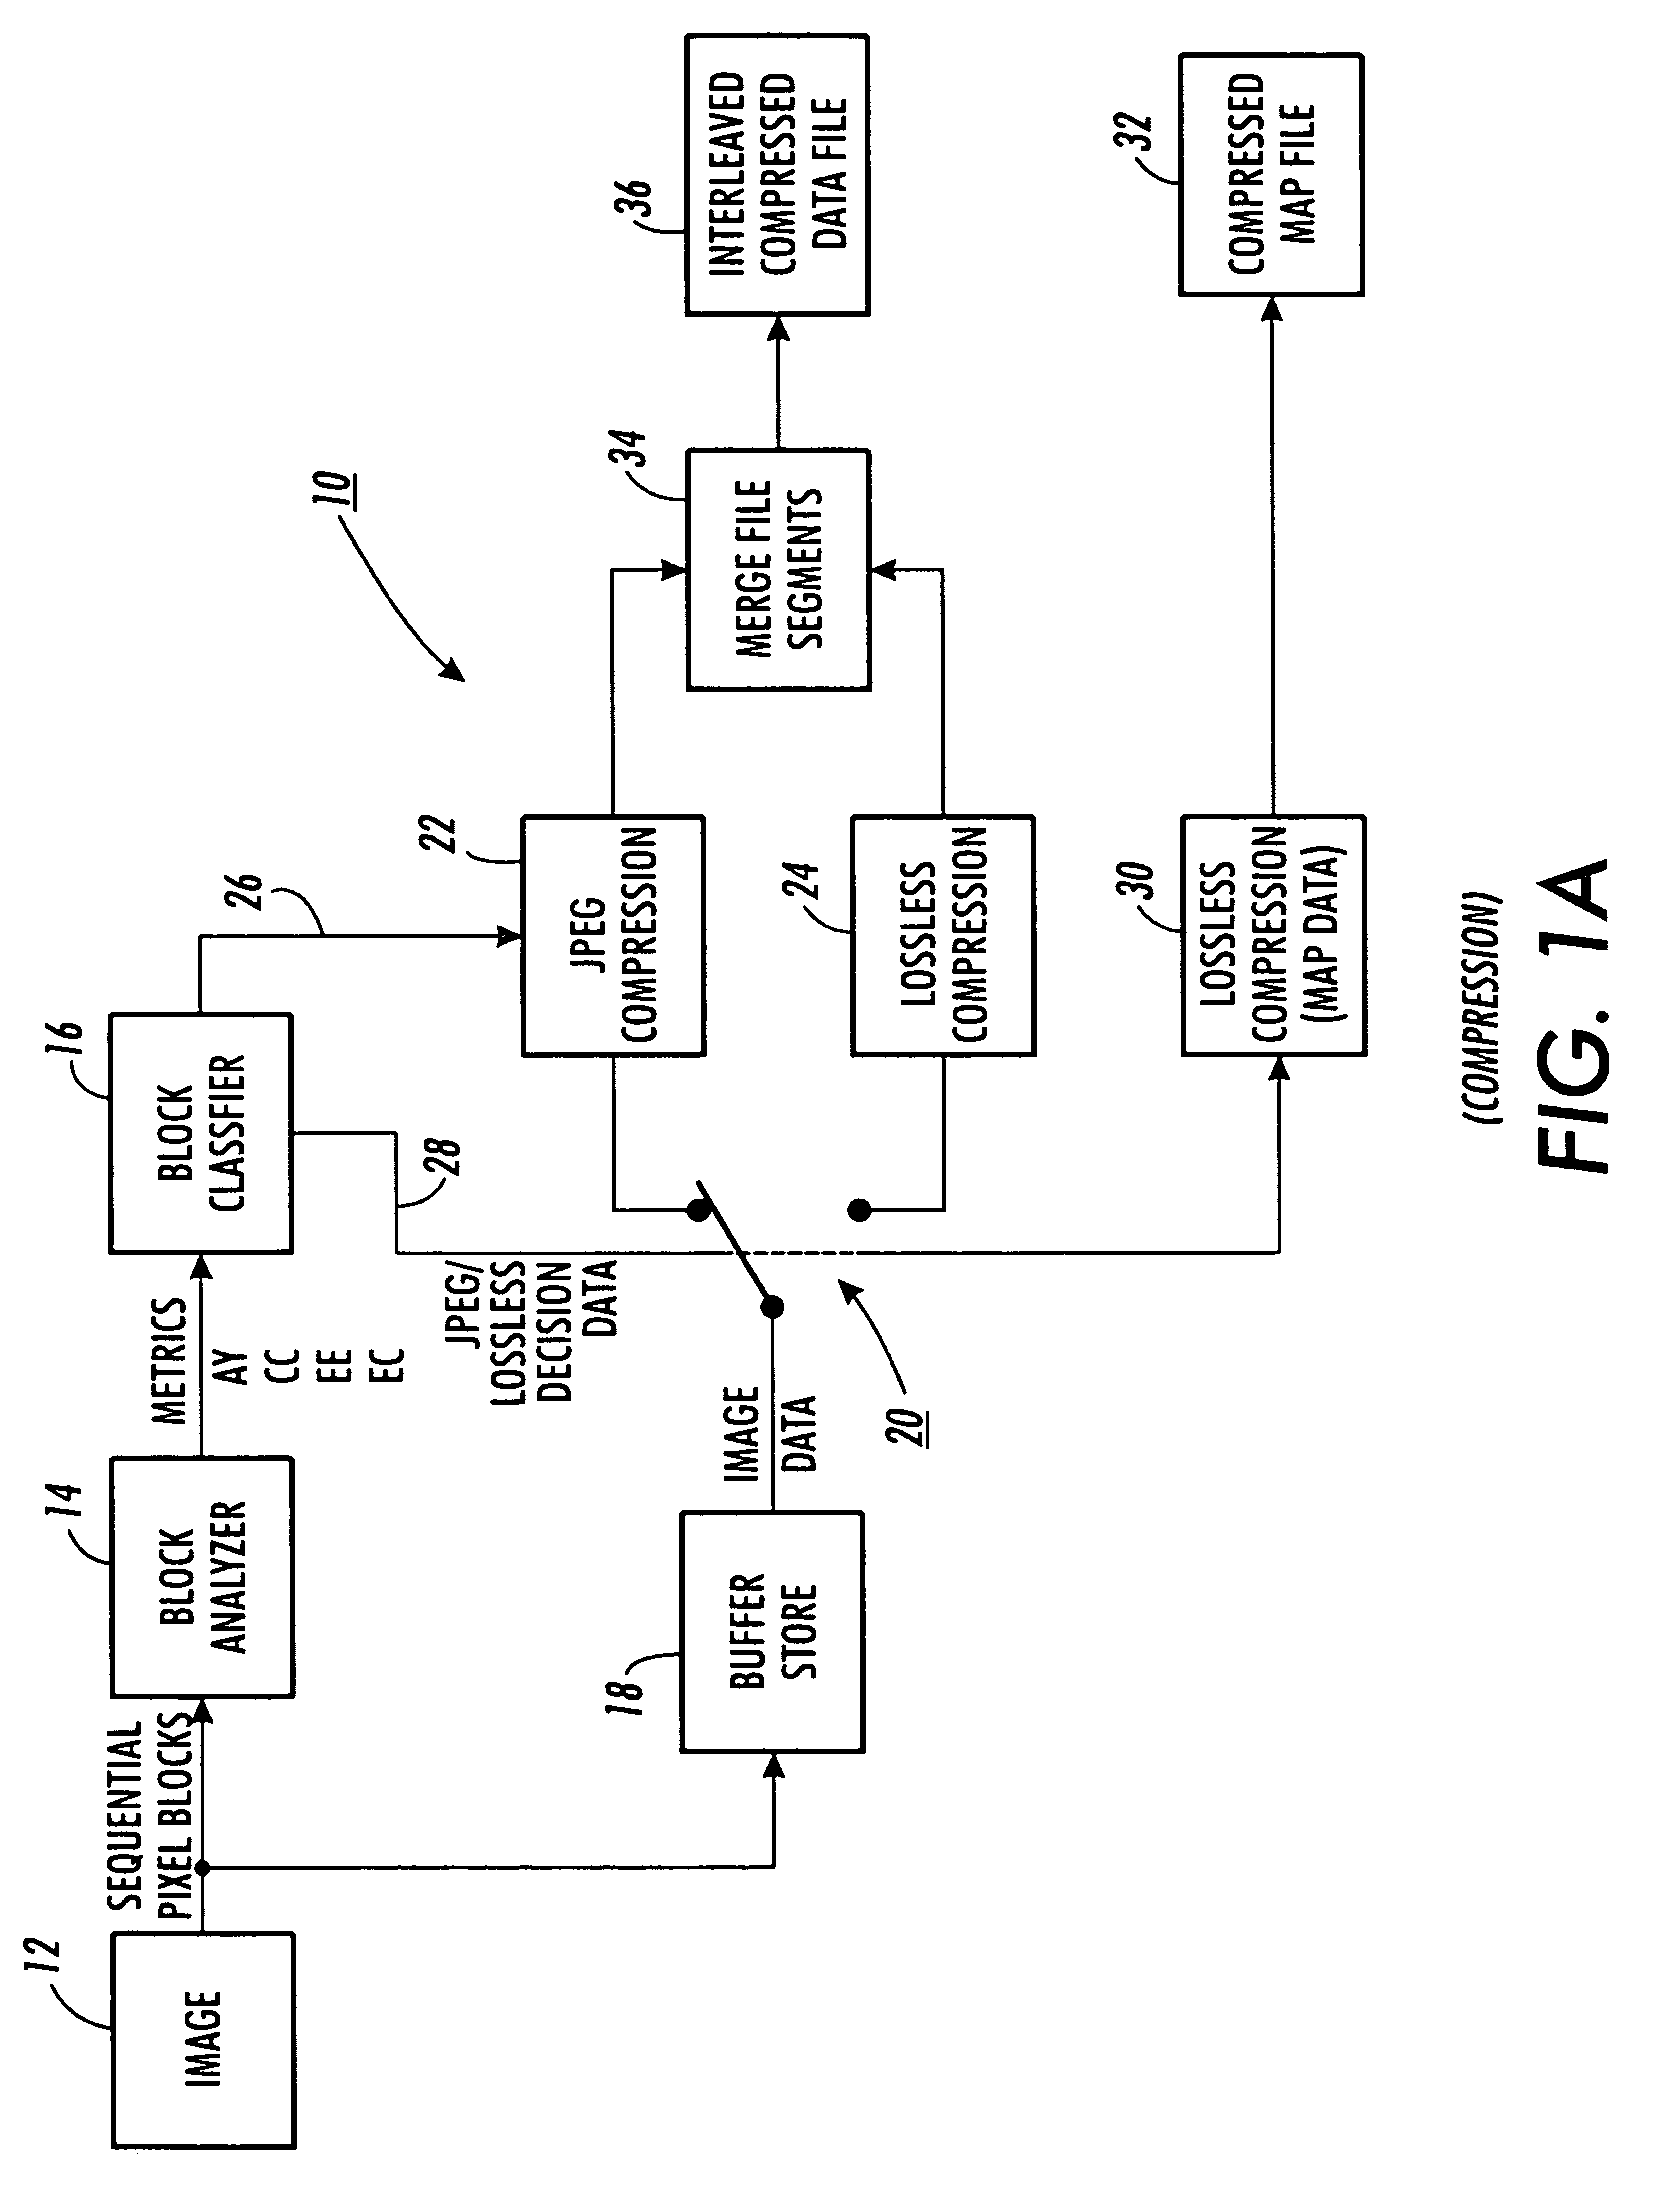 Method and apparatus for controlling image quality and compression ratios